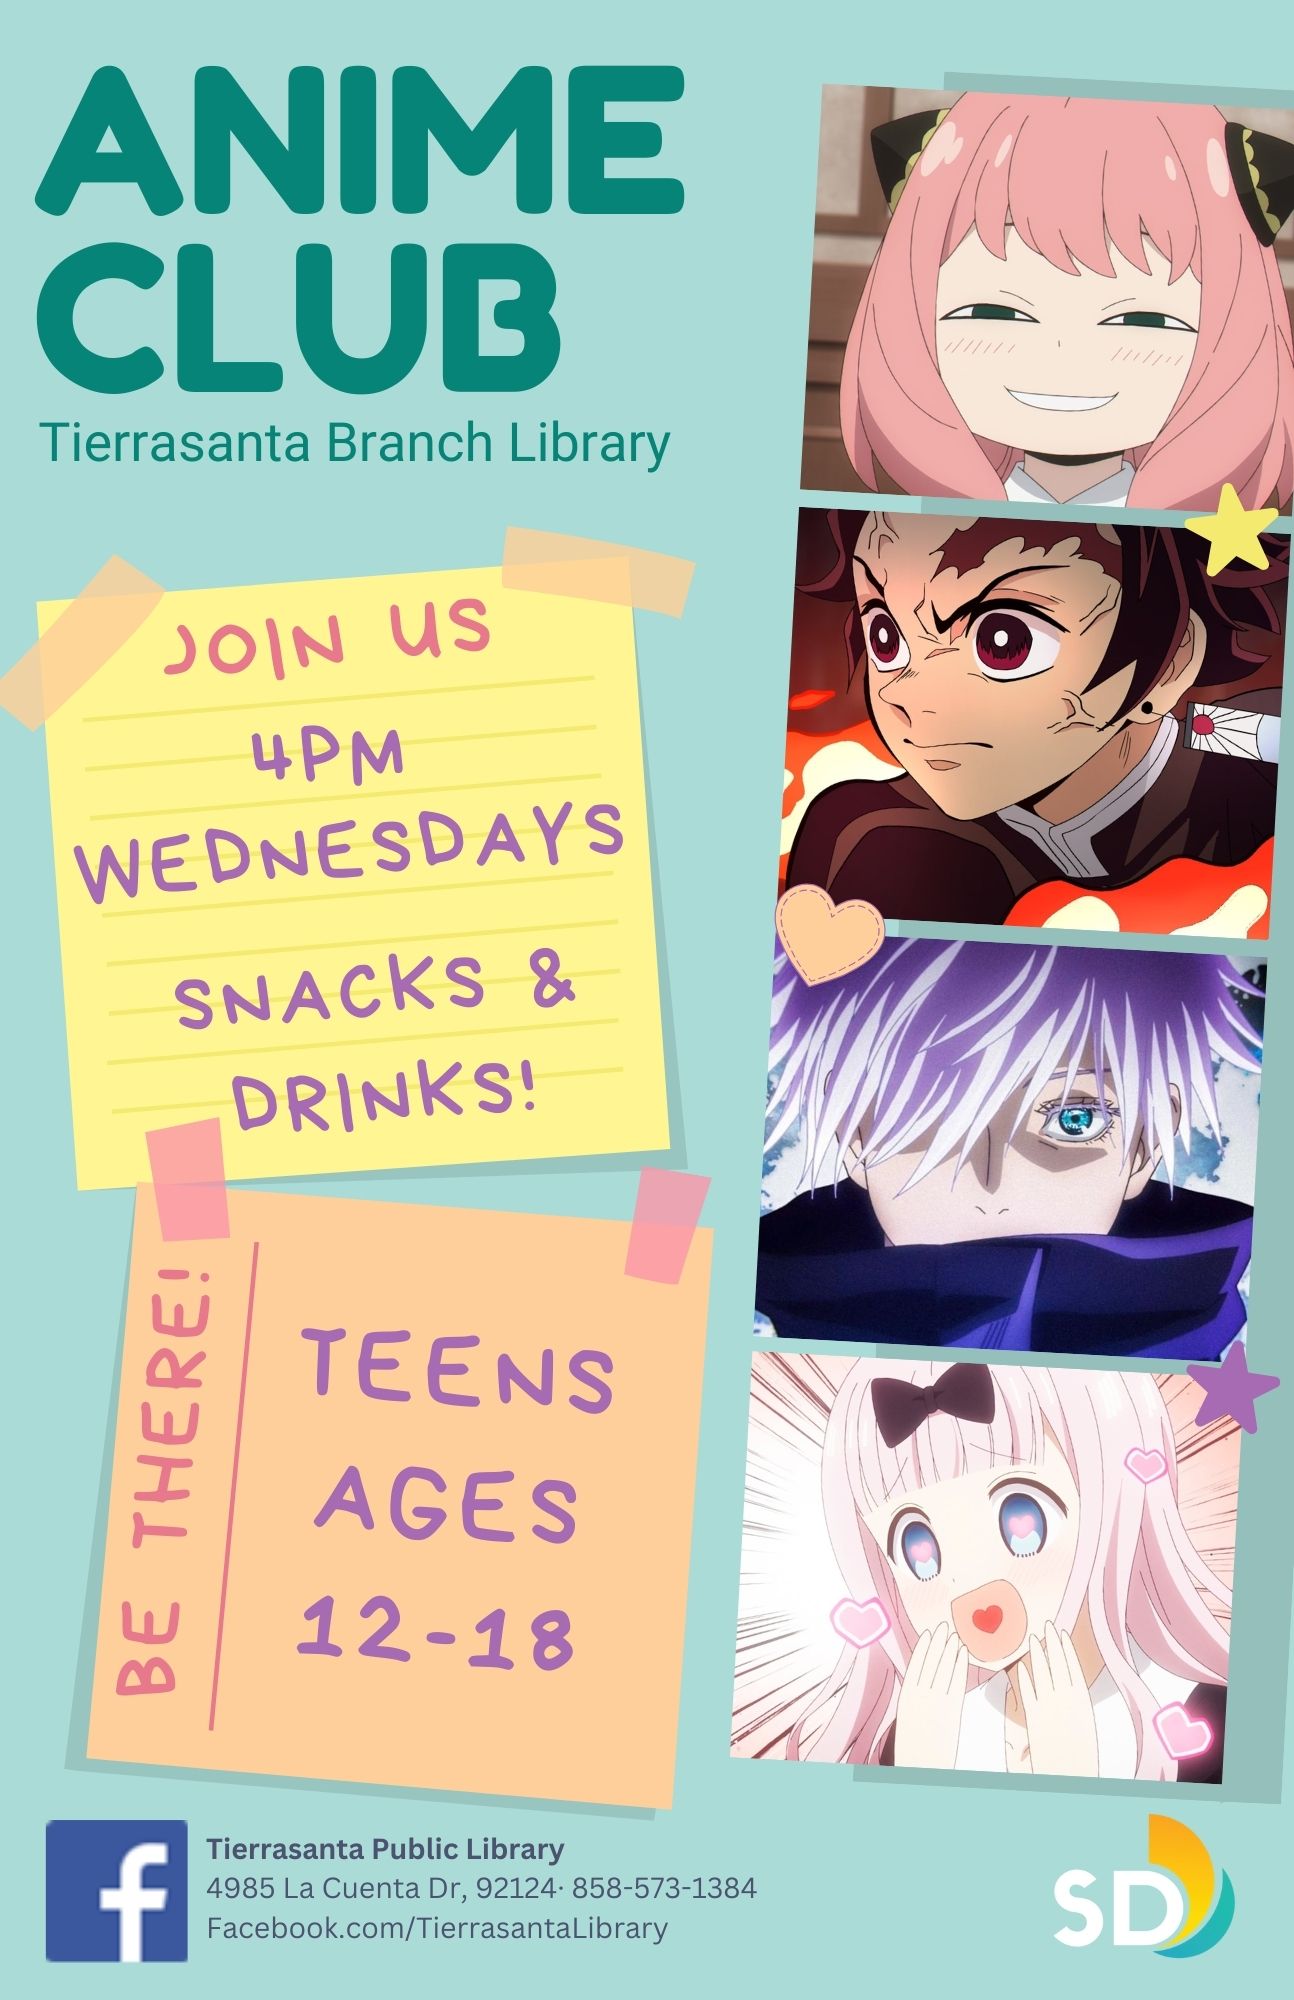 Anime Club flyer featuring anime characters on a green background.